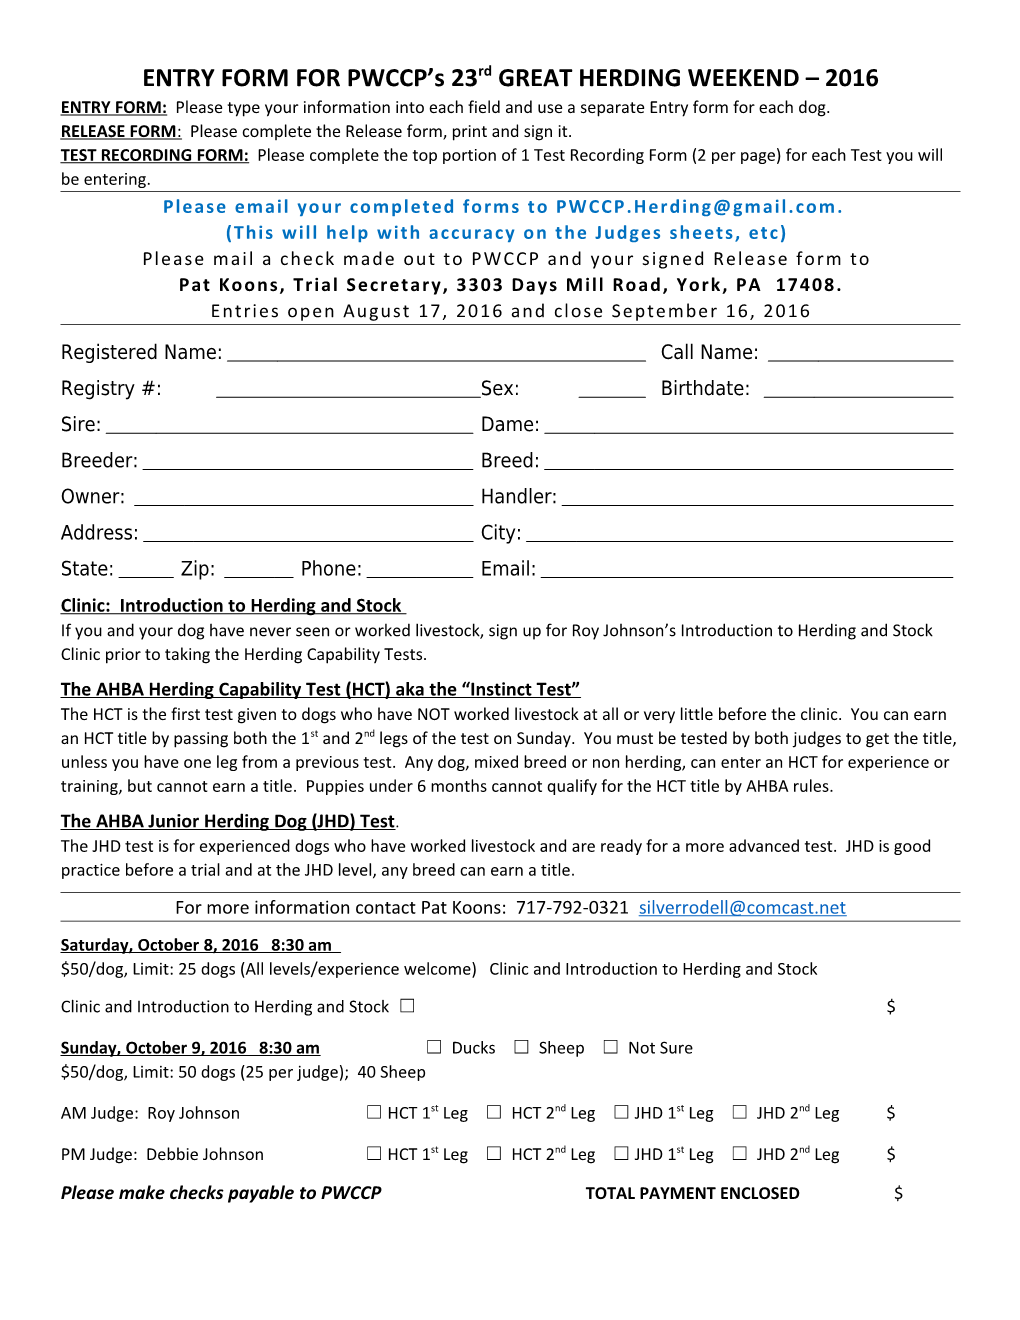 ENTRY FORM for PWCCP S 23Rd GREAT HERDING WEEKEND 2016